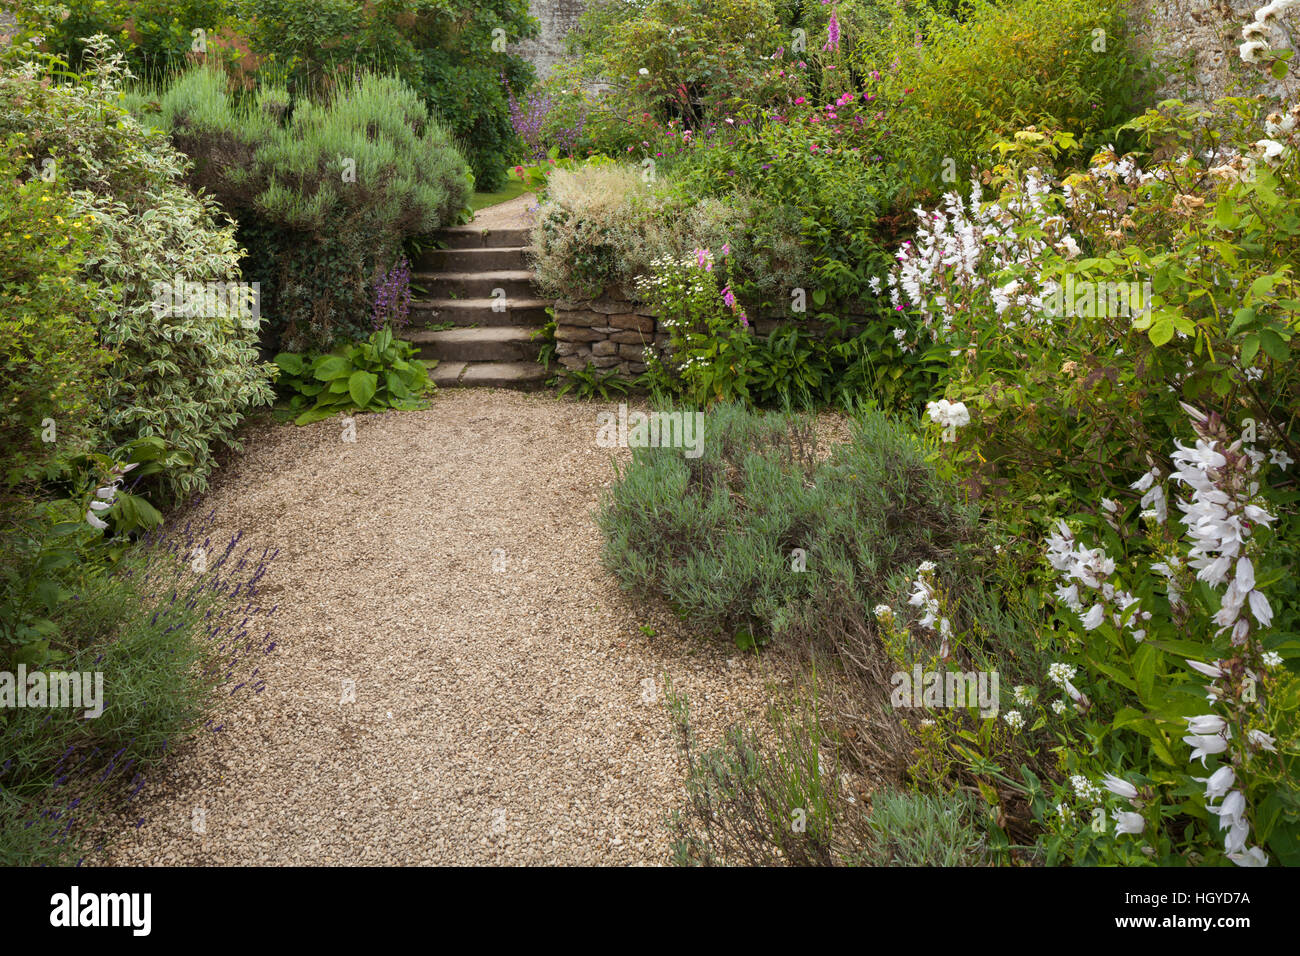 Stone steps amongst colourful summer flowers and shrubs within the walled garden of Rousham House in Oxfordshire, England Stock Photo